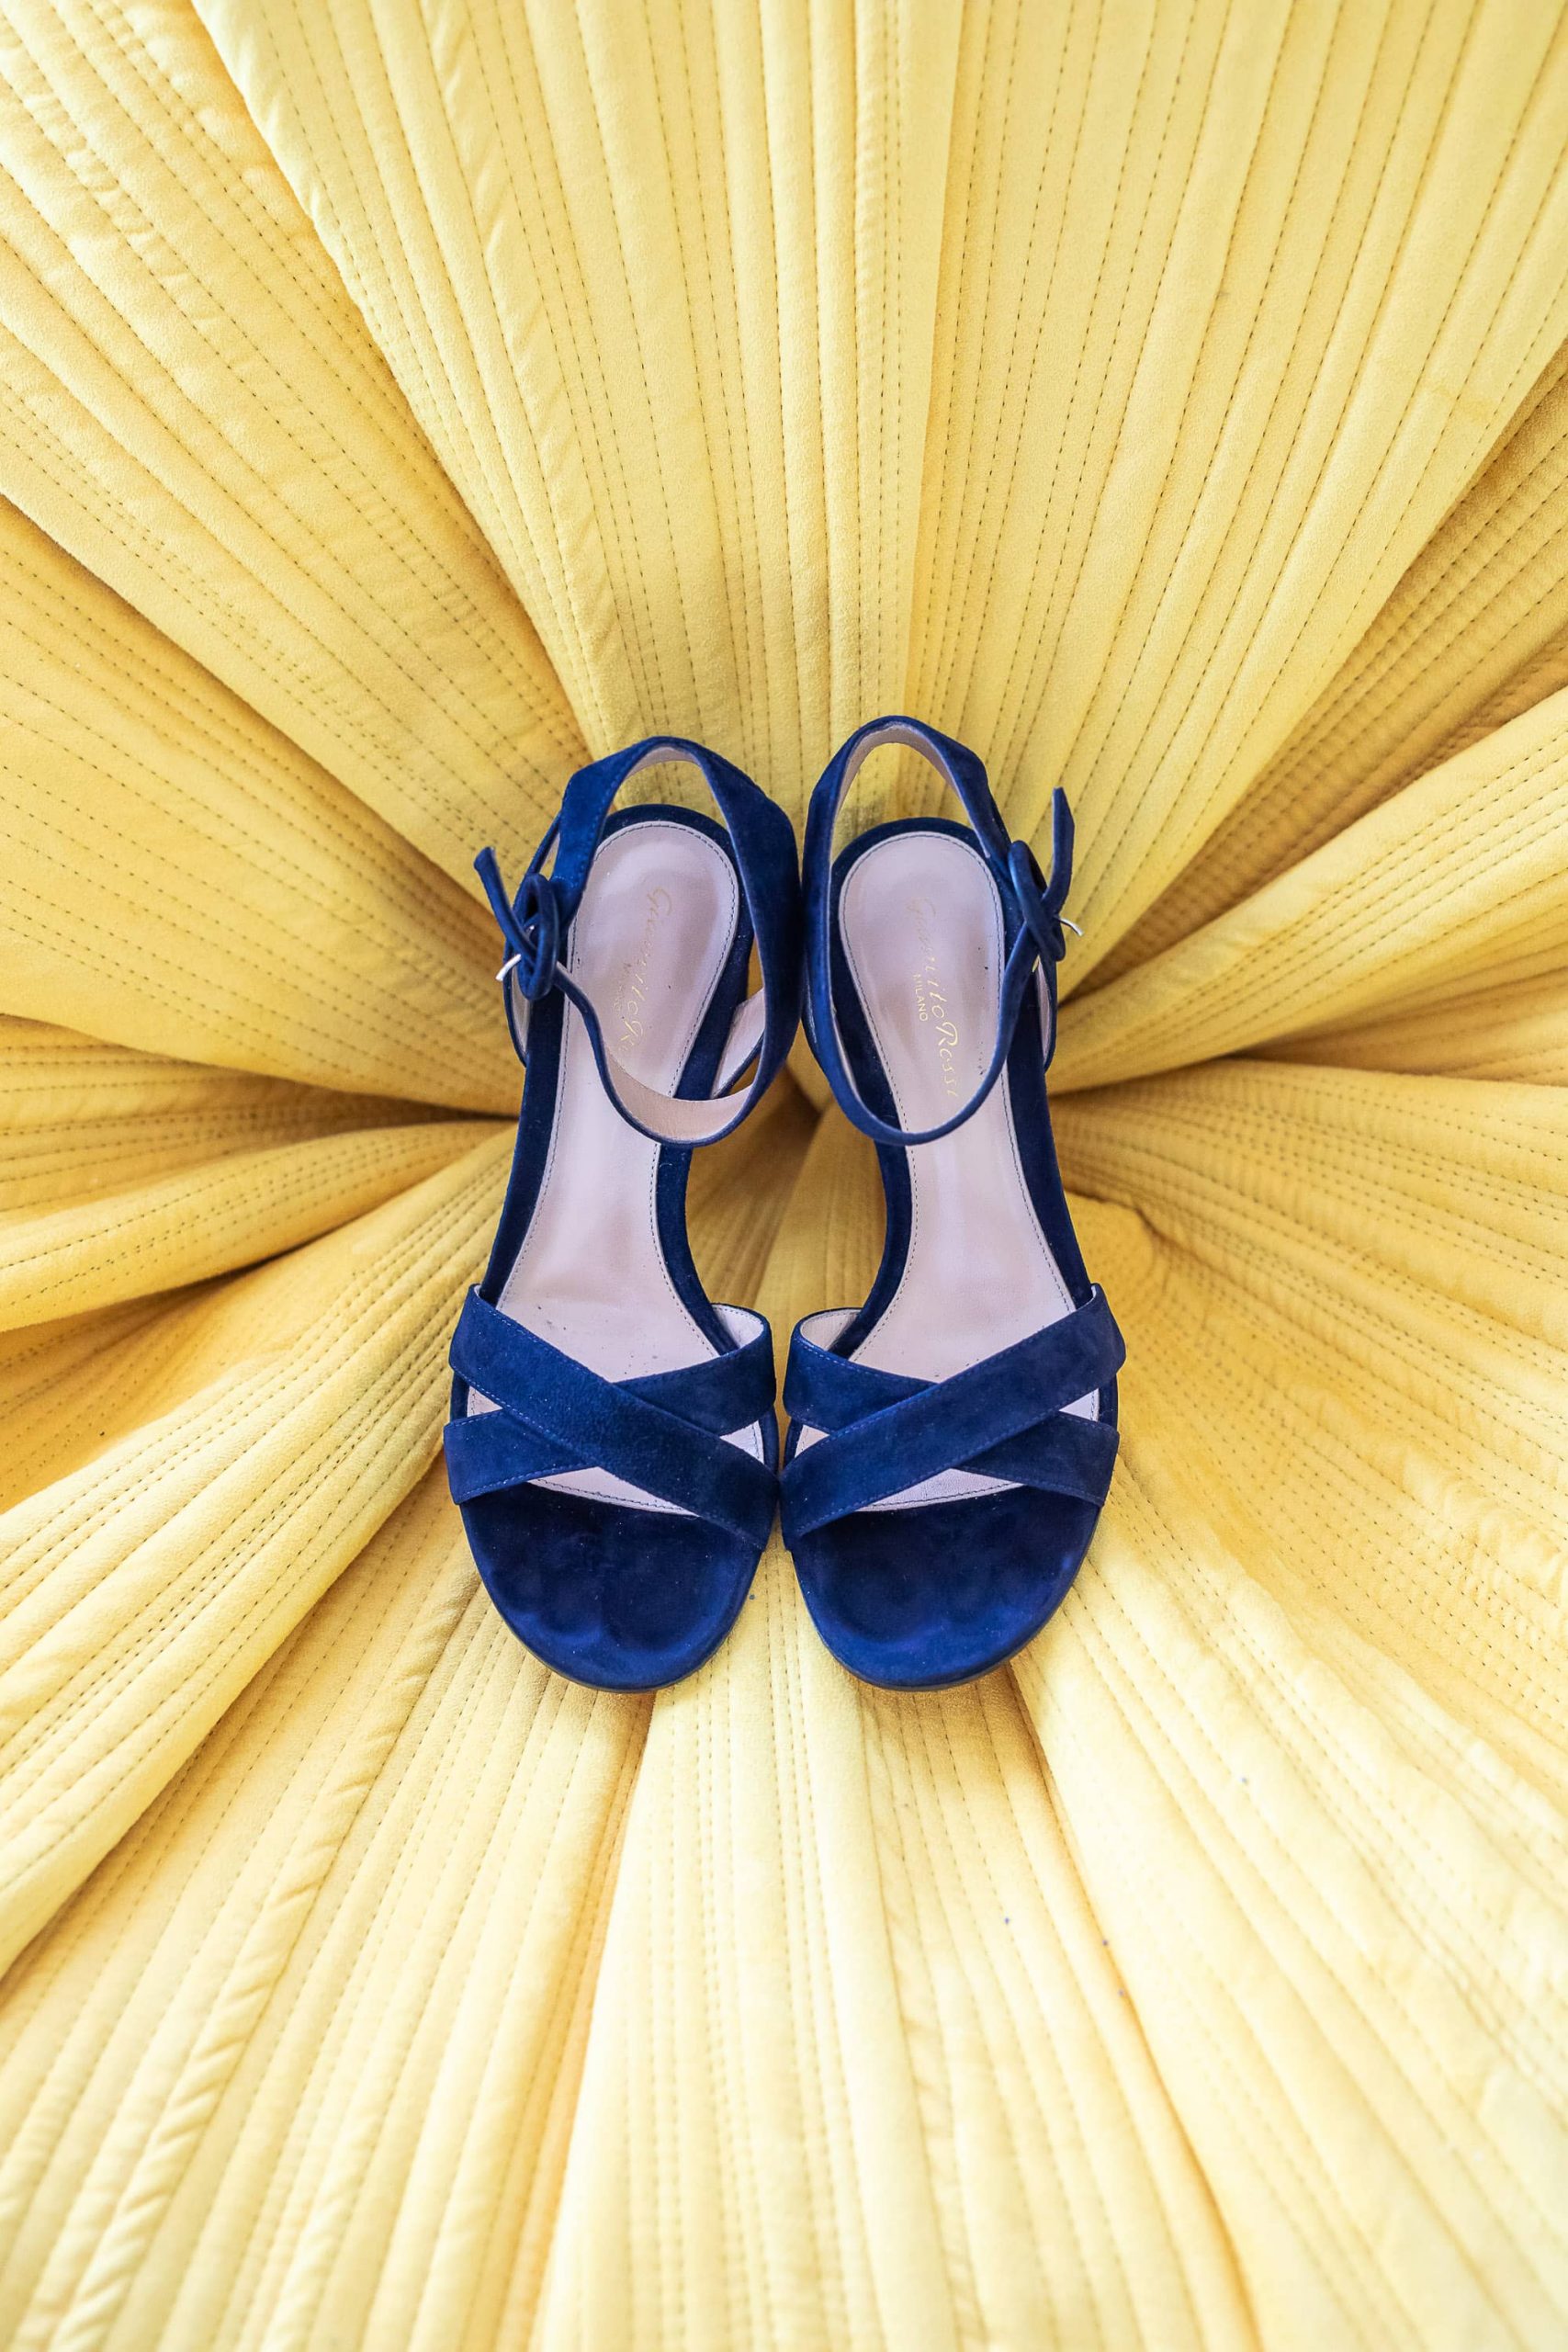 Something blue -- the bride's shoes at this Hamptons wedding weekend held at The Parrish Museum | Photo by Roey Yohai Studio